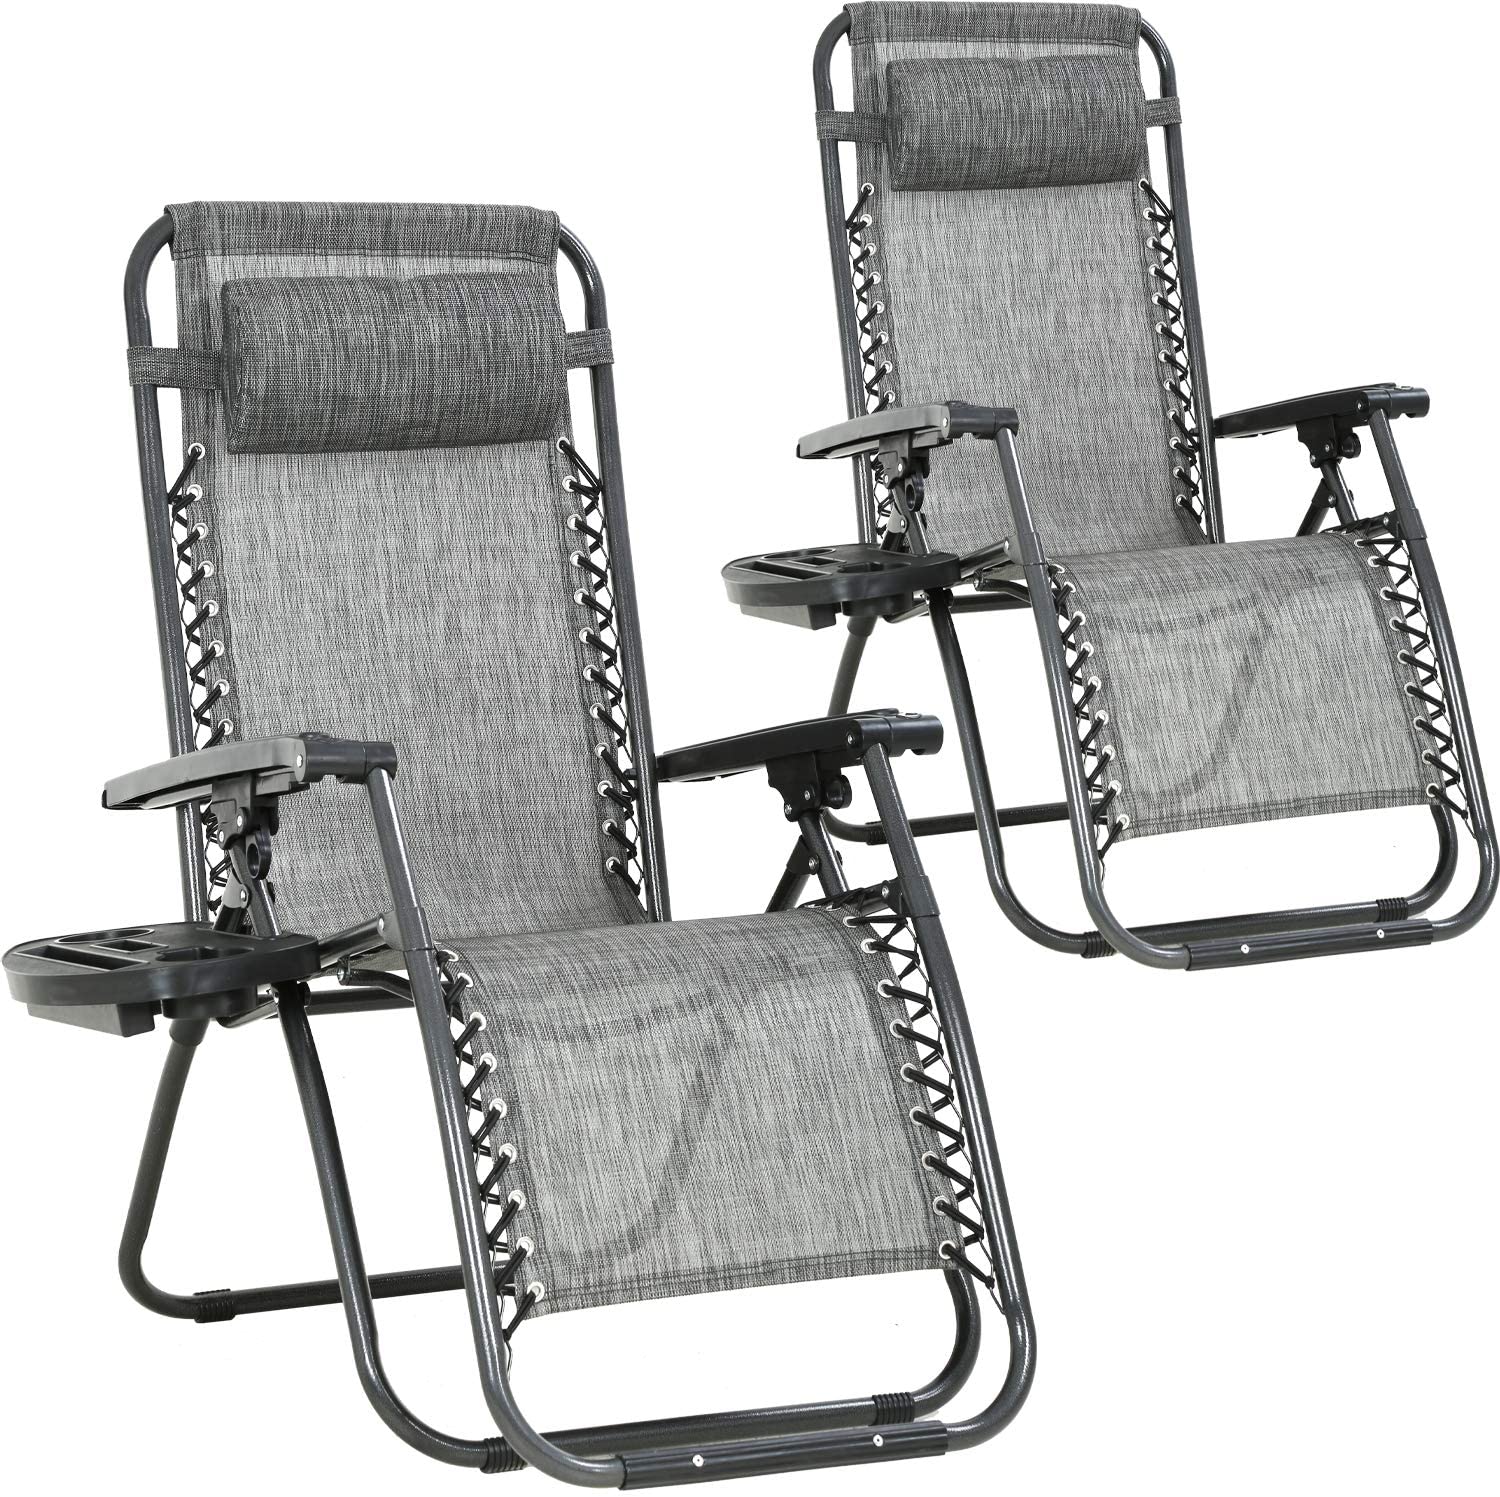 BestMassage 2 Pack Steel Zero-Gravity Chair - Gray and Black - image 1 of 7